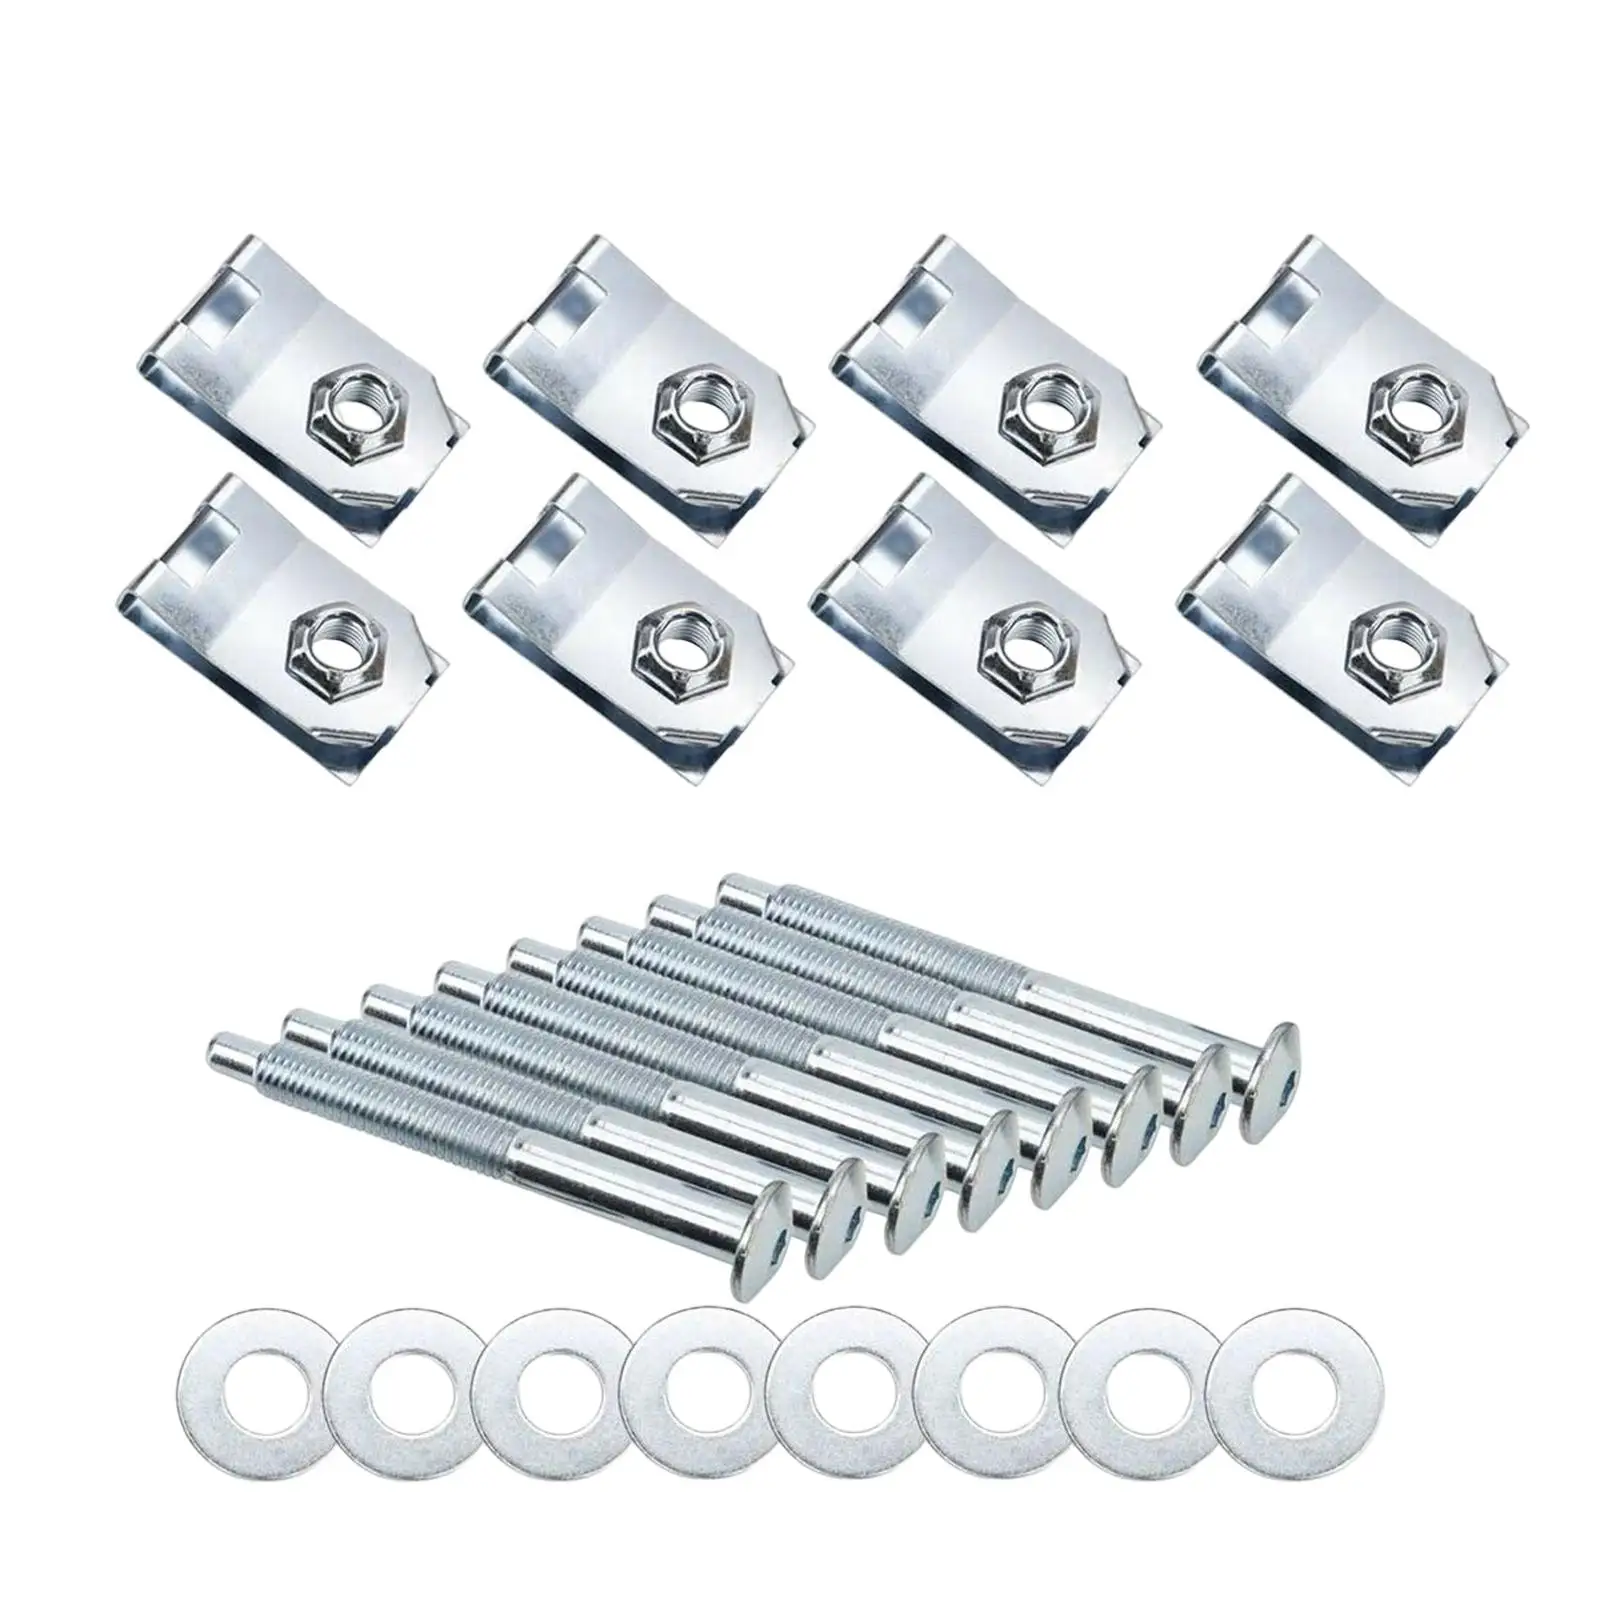 

924 311 Truck Bed Mounting Bolt Kit Spare Parts Fasteners Hardware Bolts for Ford Super Duty F250 F550 F350 Accessories